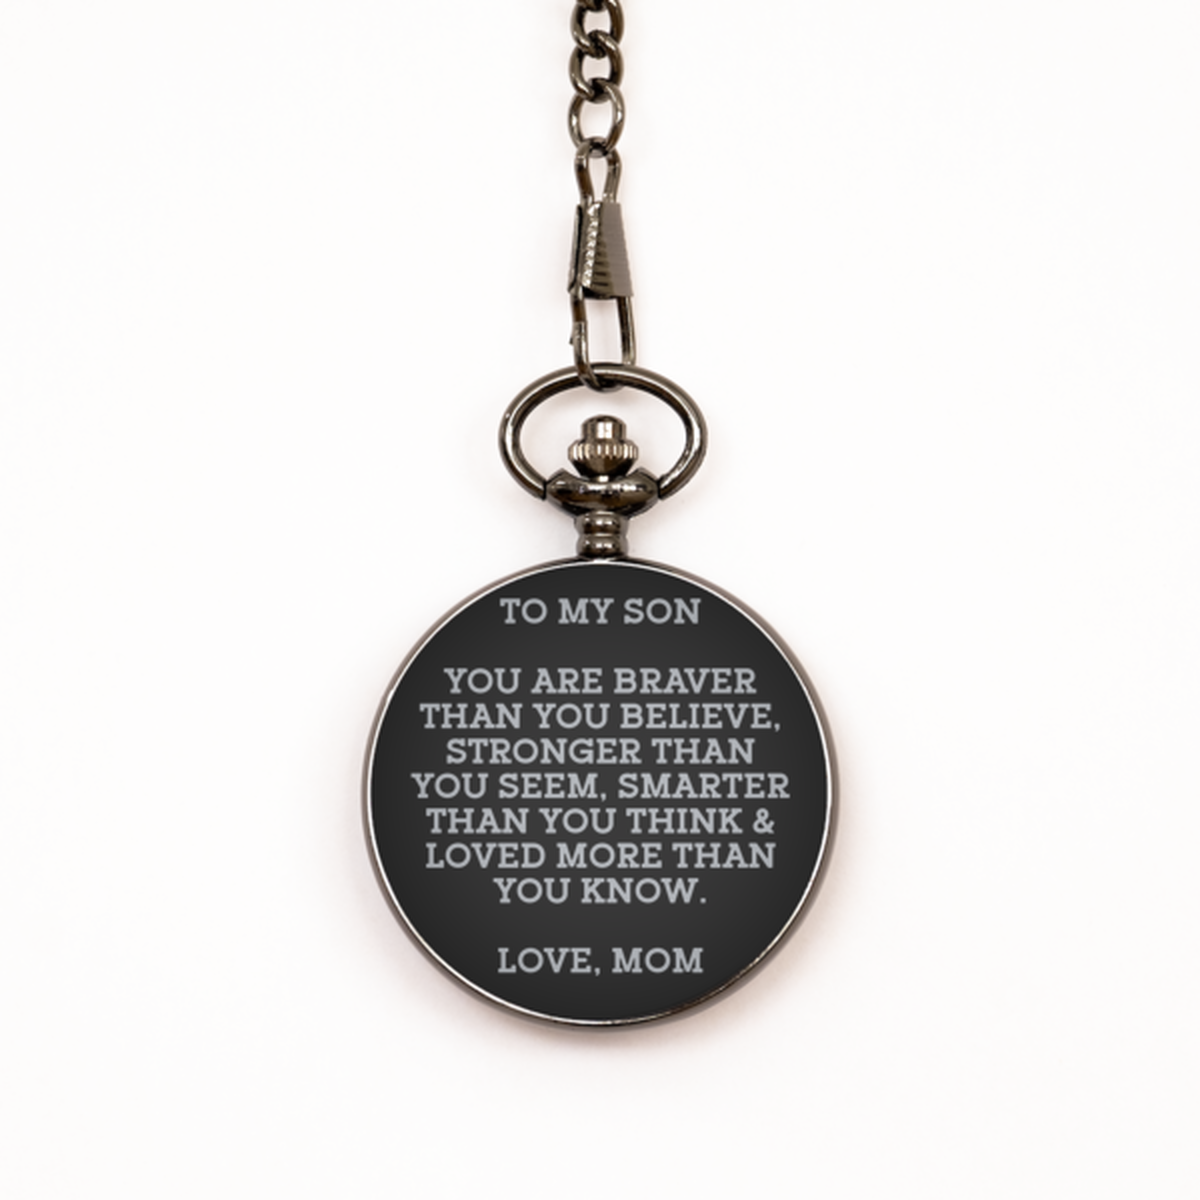 To My Son Black Pocket Watch, You Are Braver Than You Believe, Graduation Day Gifts For Son From Mom, Birthday Gifts For Men